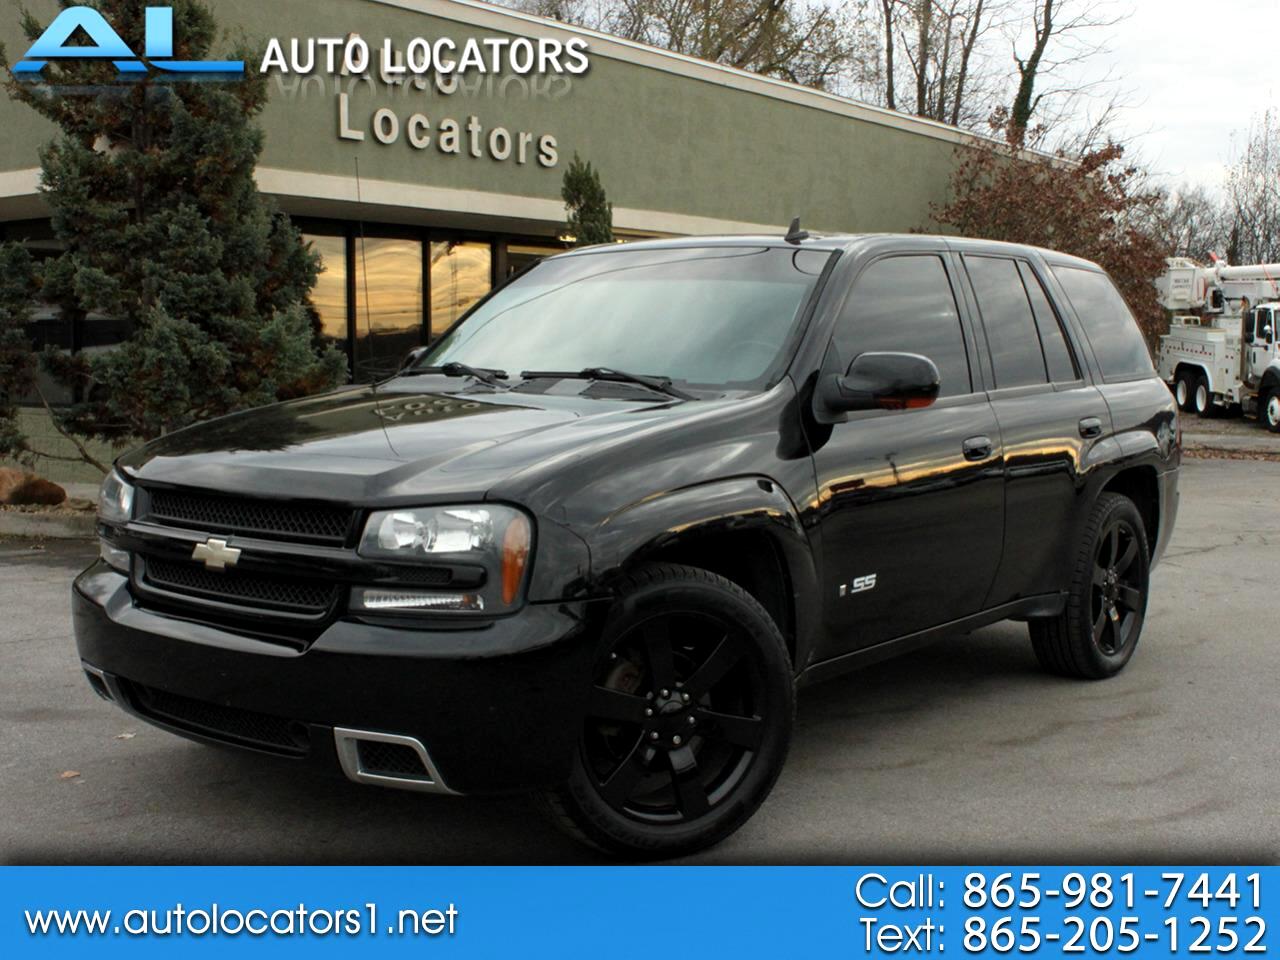 Used 2007 Chevrolet Trailblazer 4wd 4dr Ss For Sale In